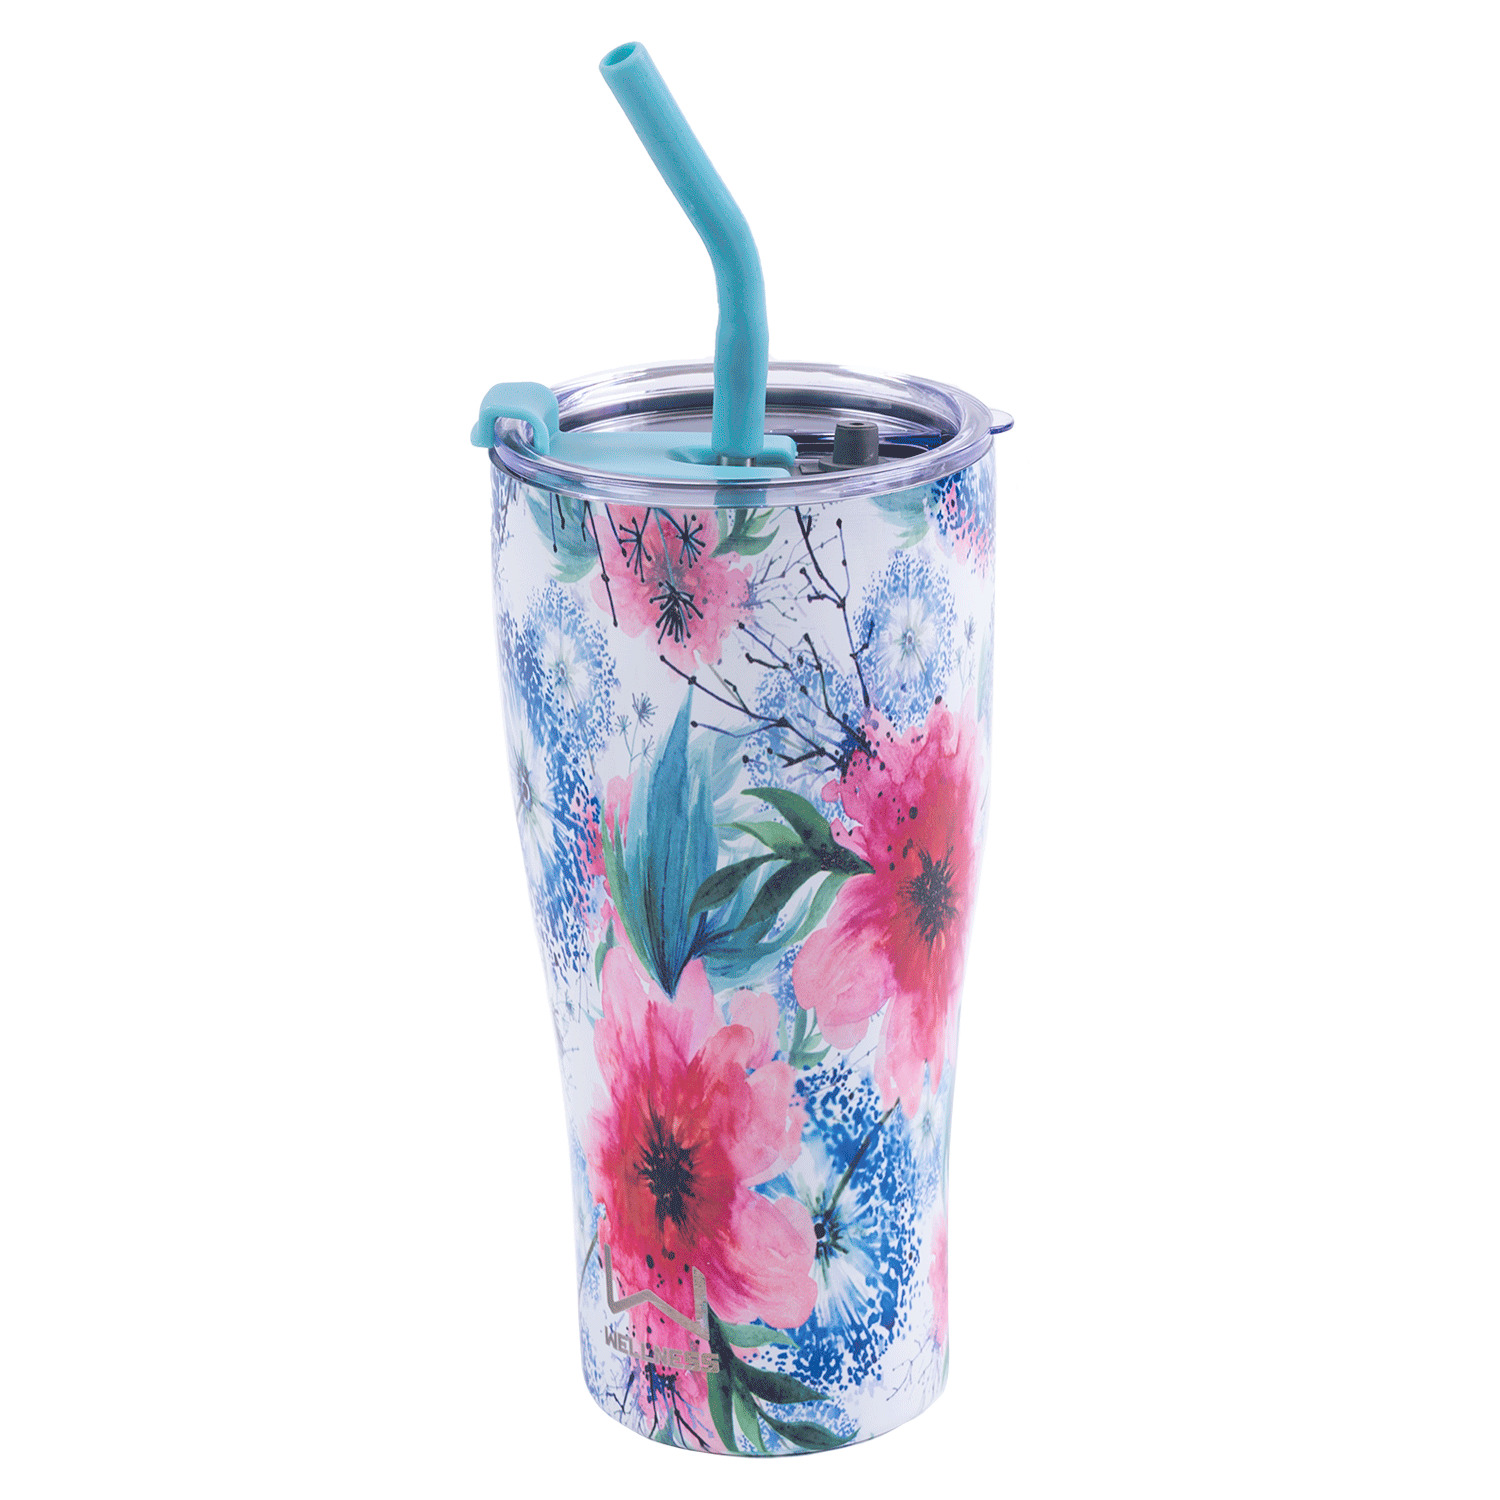 Floral stainless steel tumbler with silicone straw, 20oz